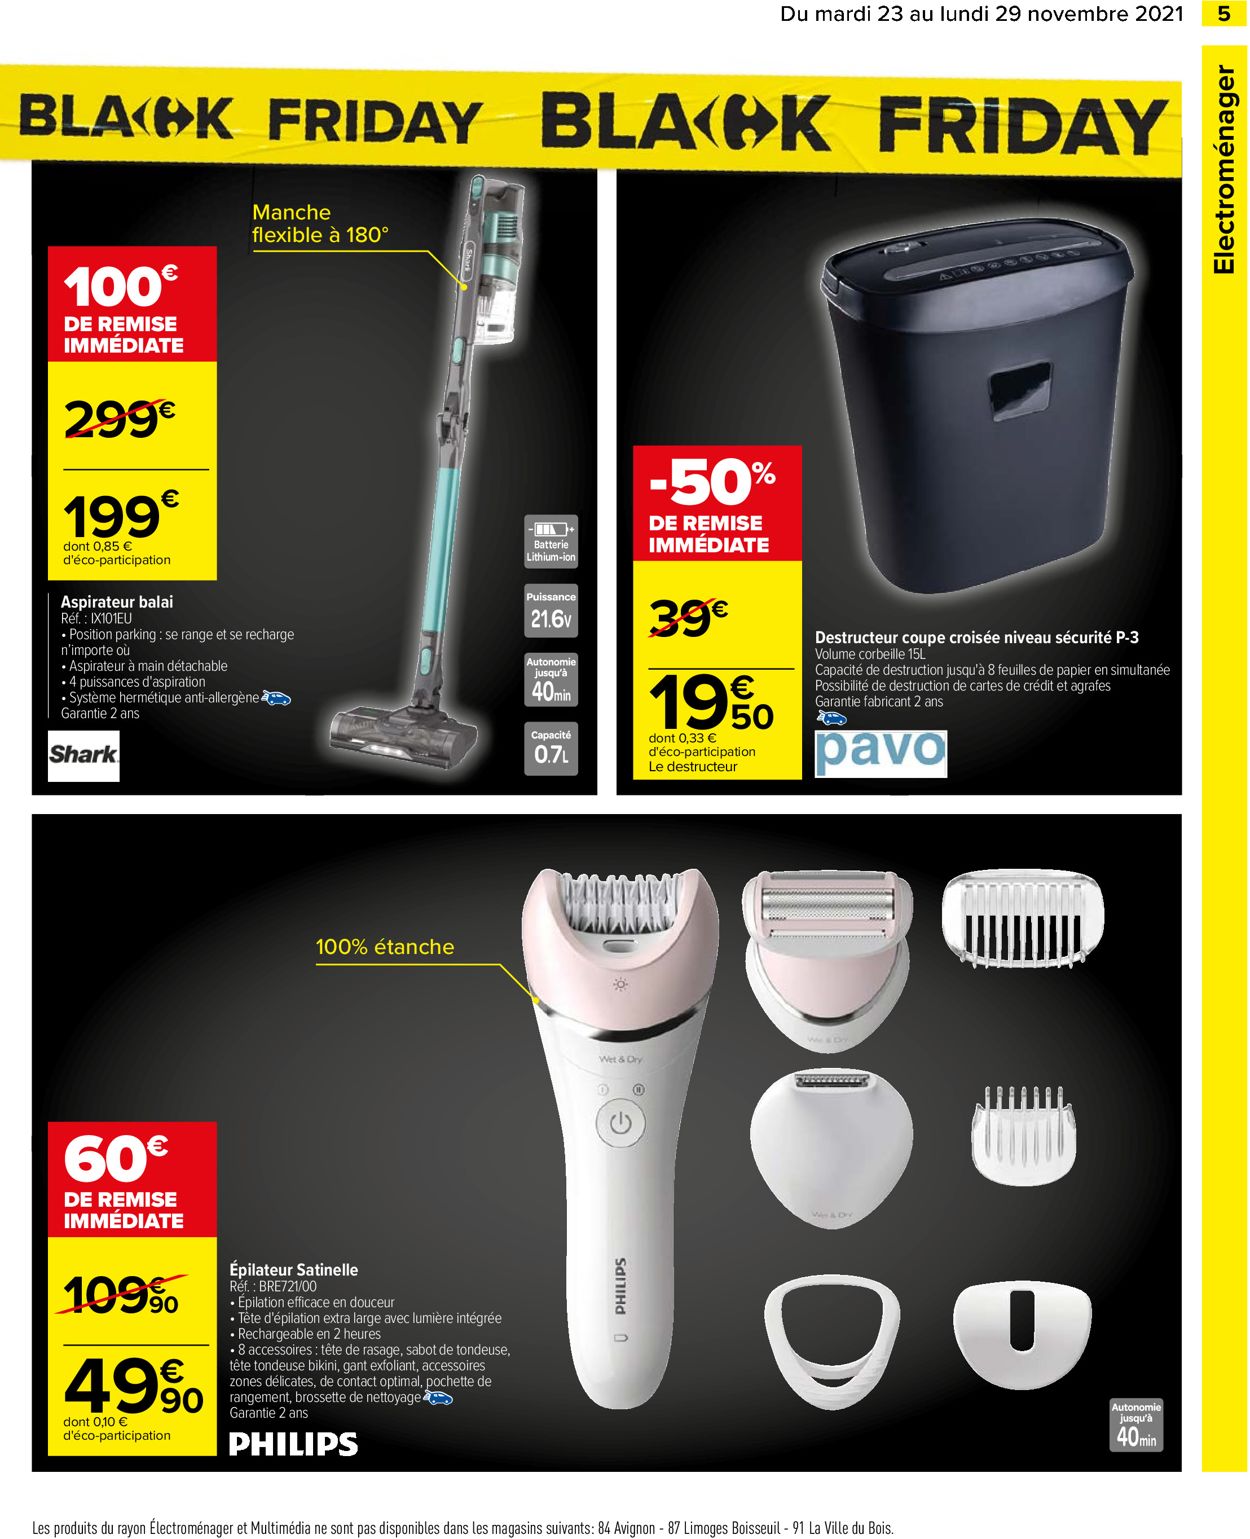 Carrefour BLACK WEEK 2021 Catalogue - 23.11-29.11.2021 (Page 5)